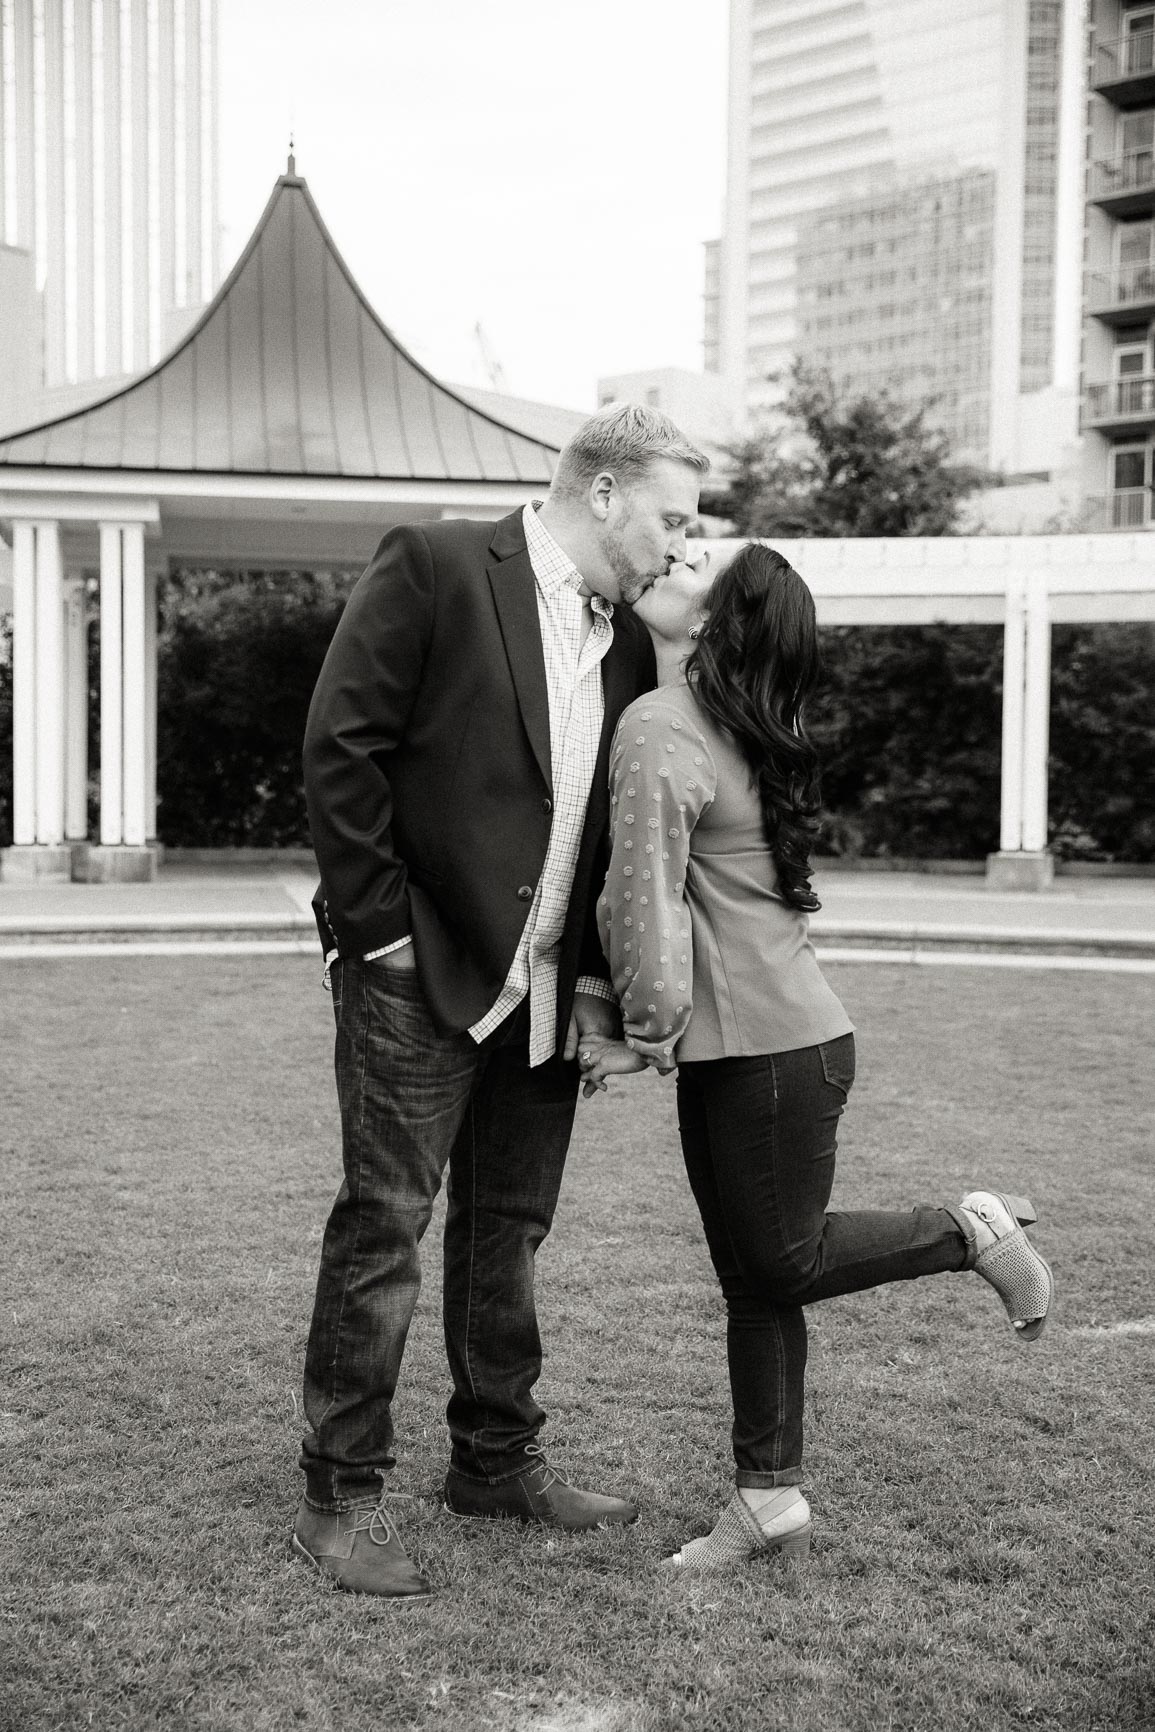 Uptown Charlotte engagement session at Romare Bearden Park shot by Nhieu Tang Photography | nhieutang.com